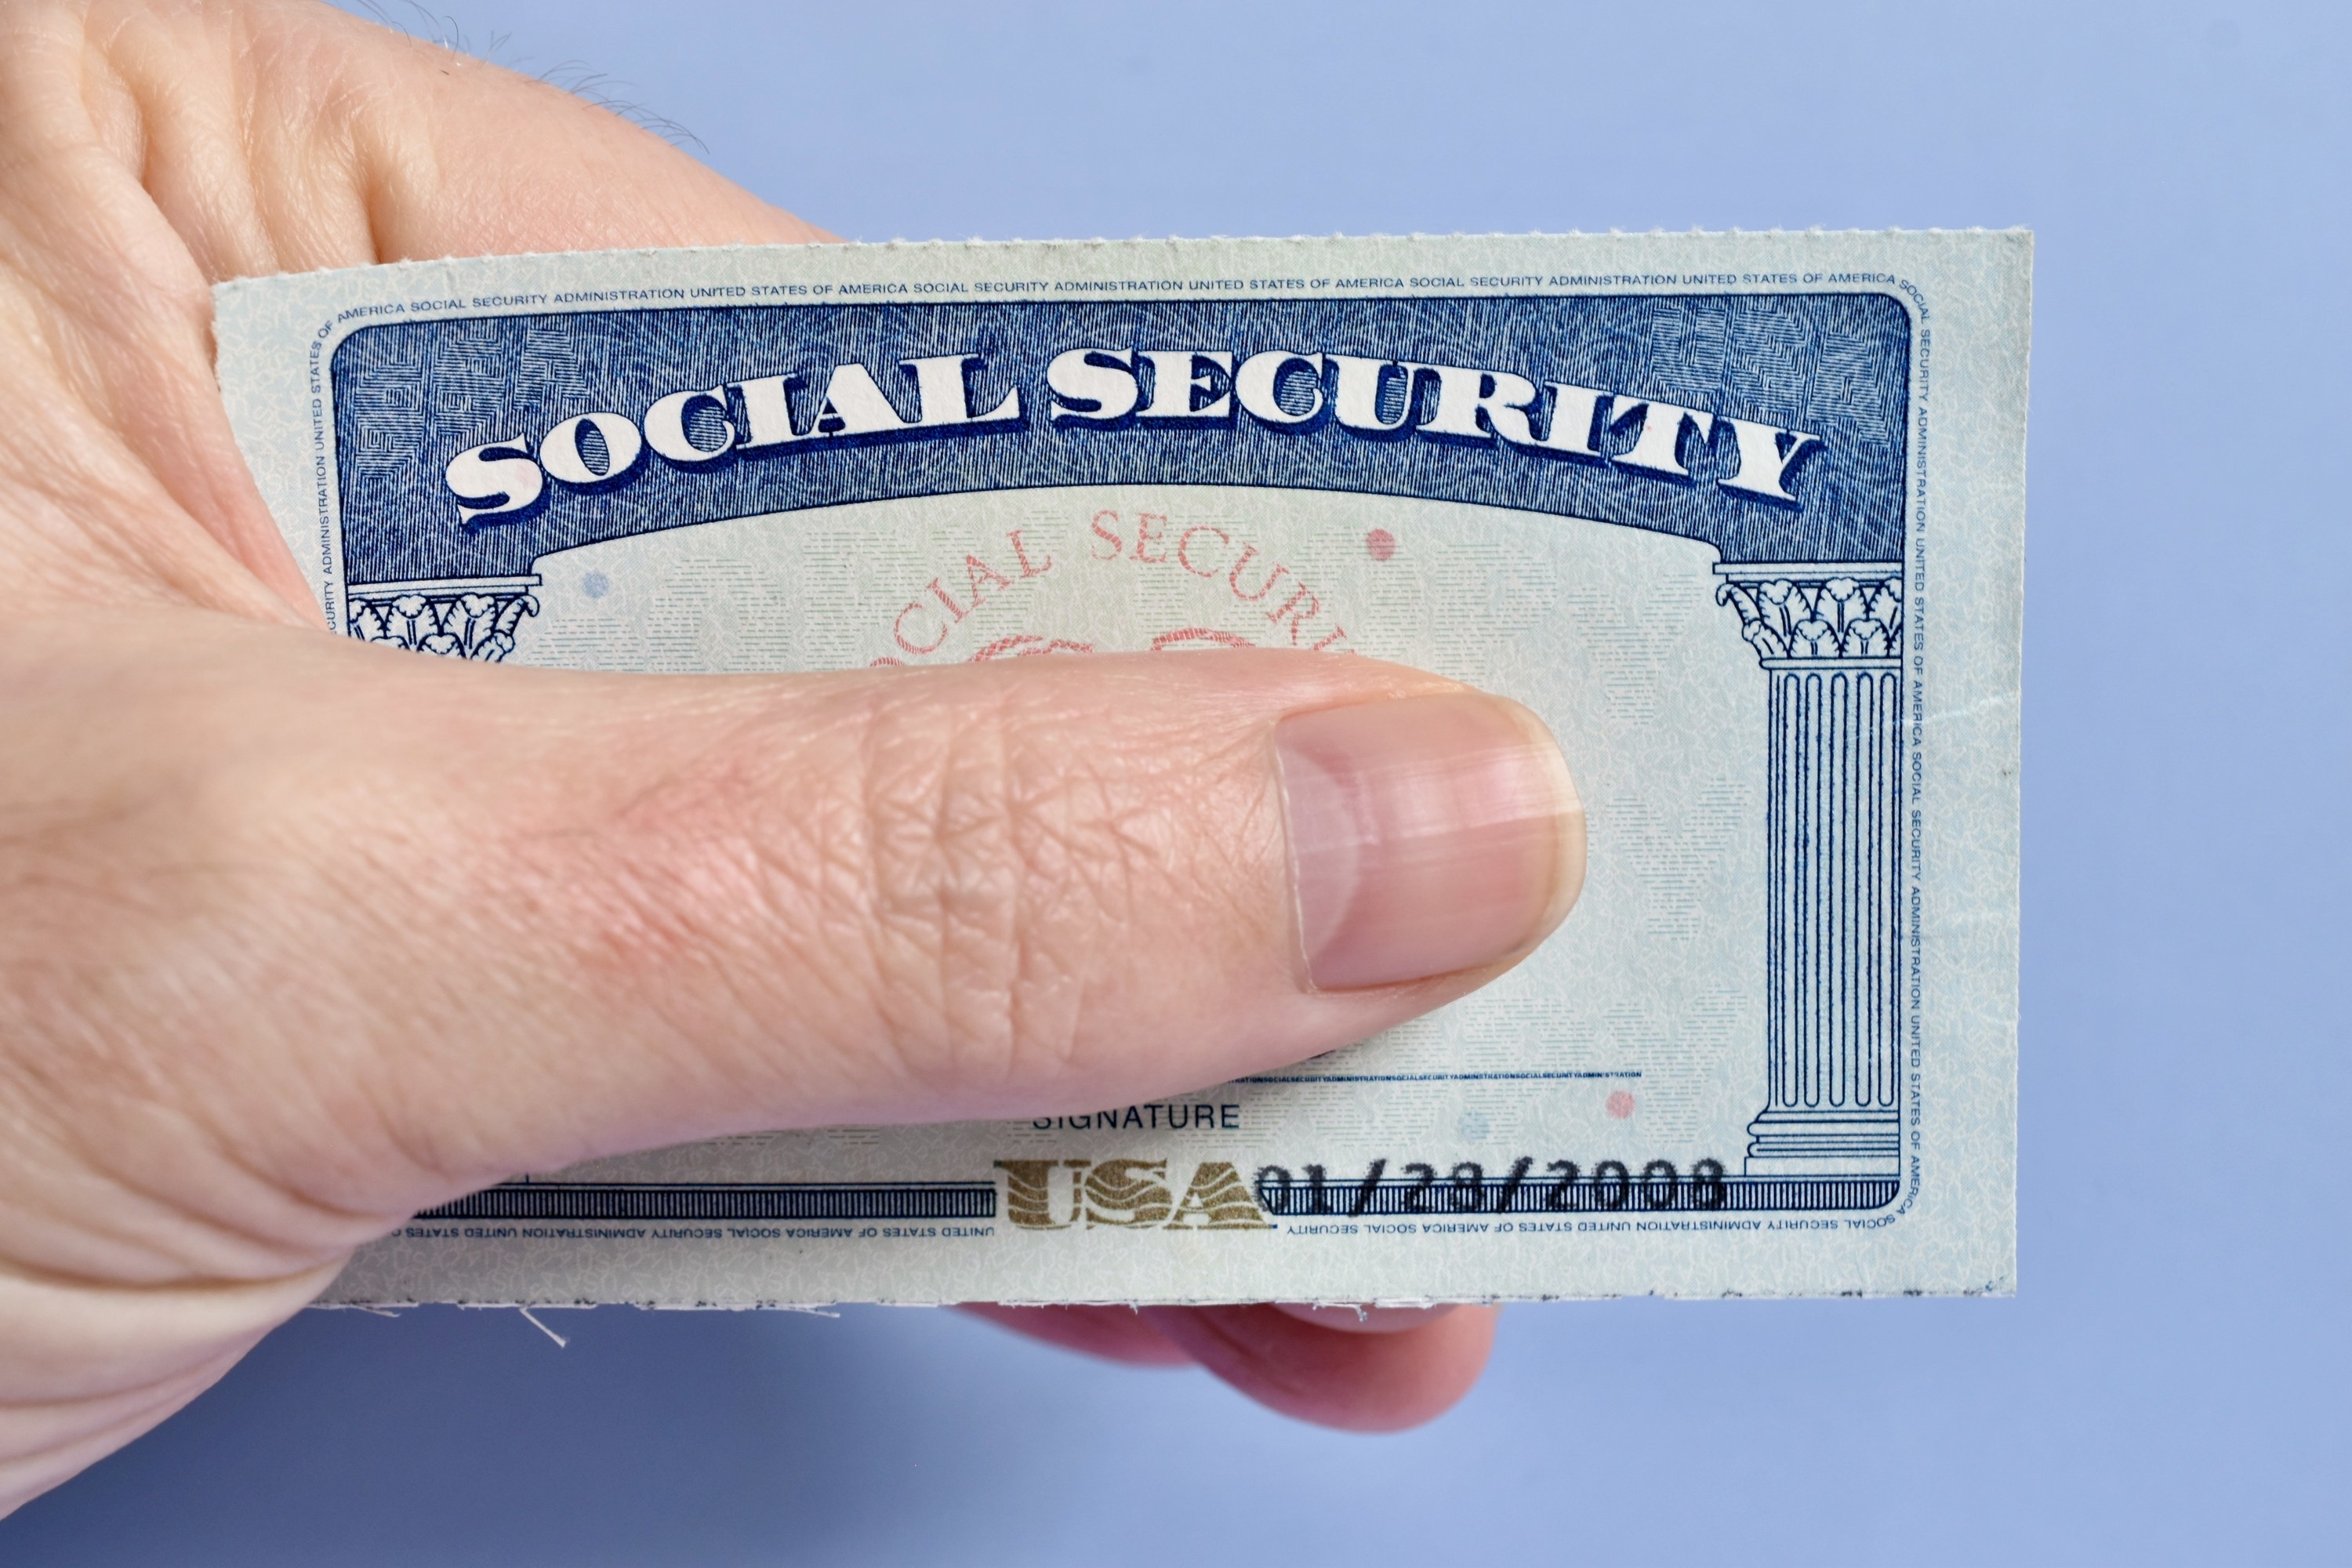 social security card with number blocked